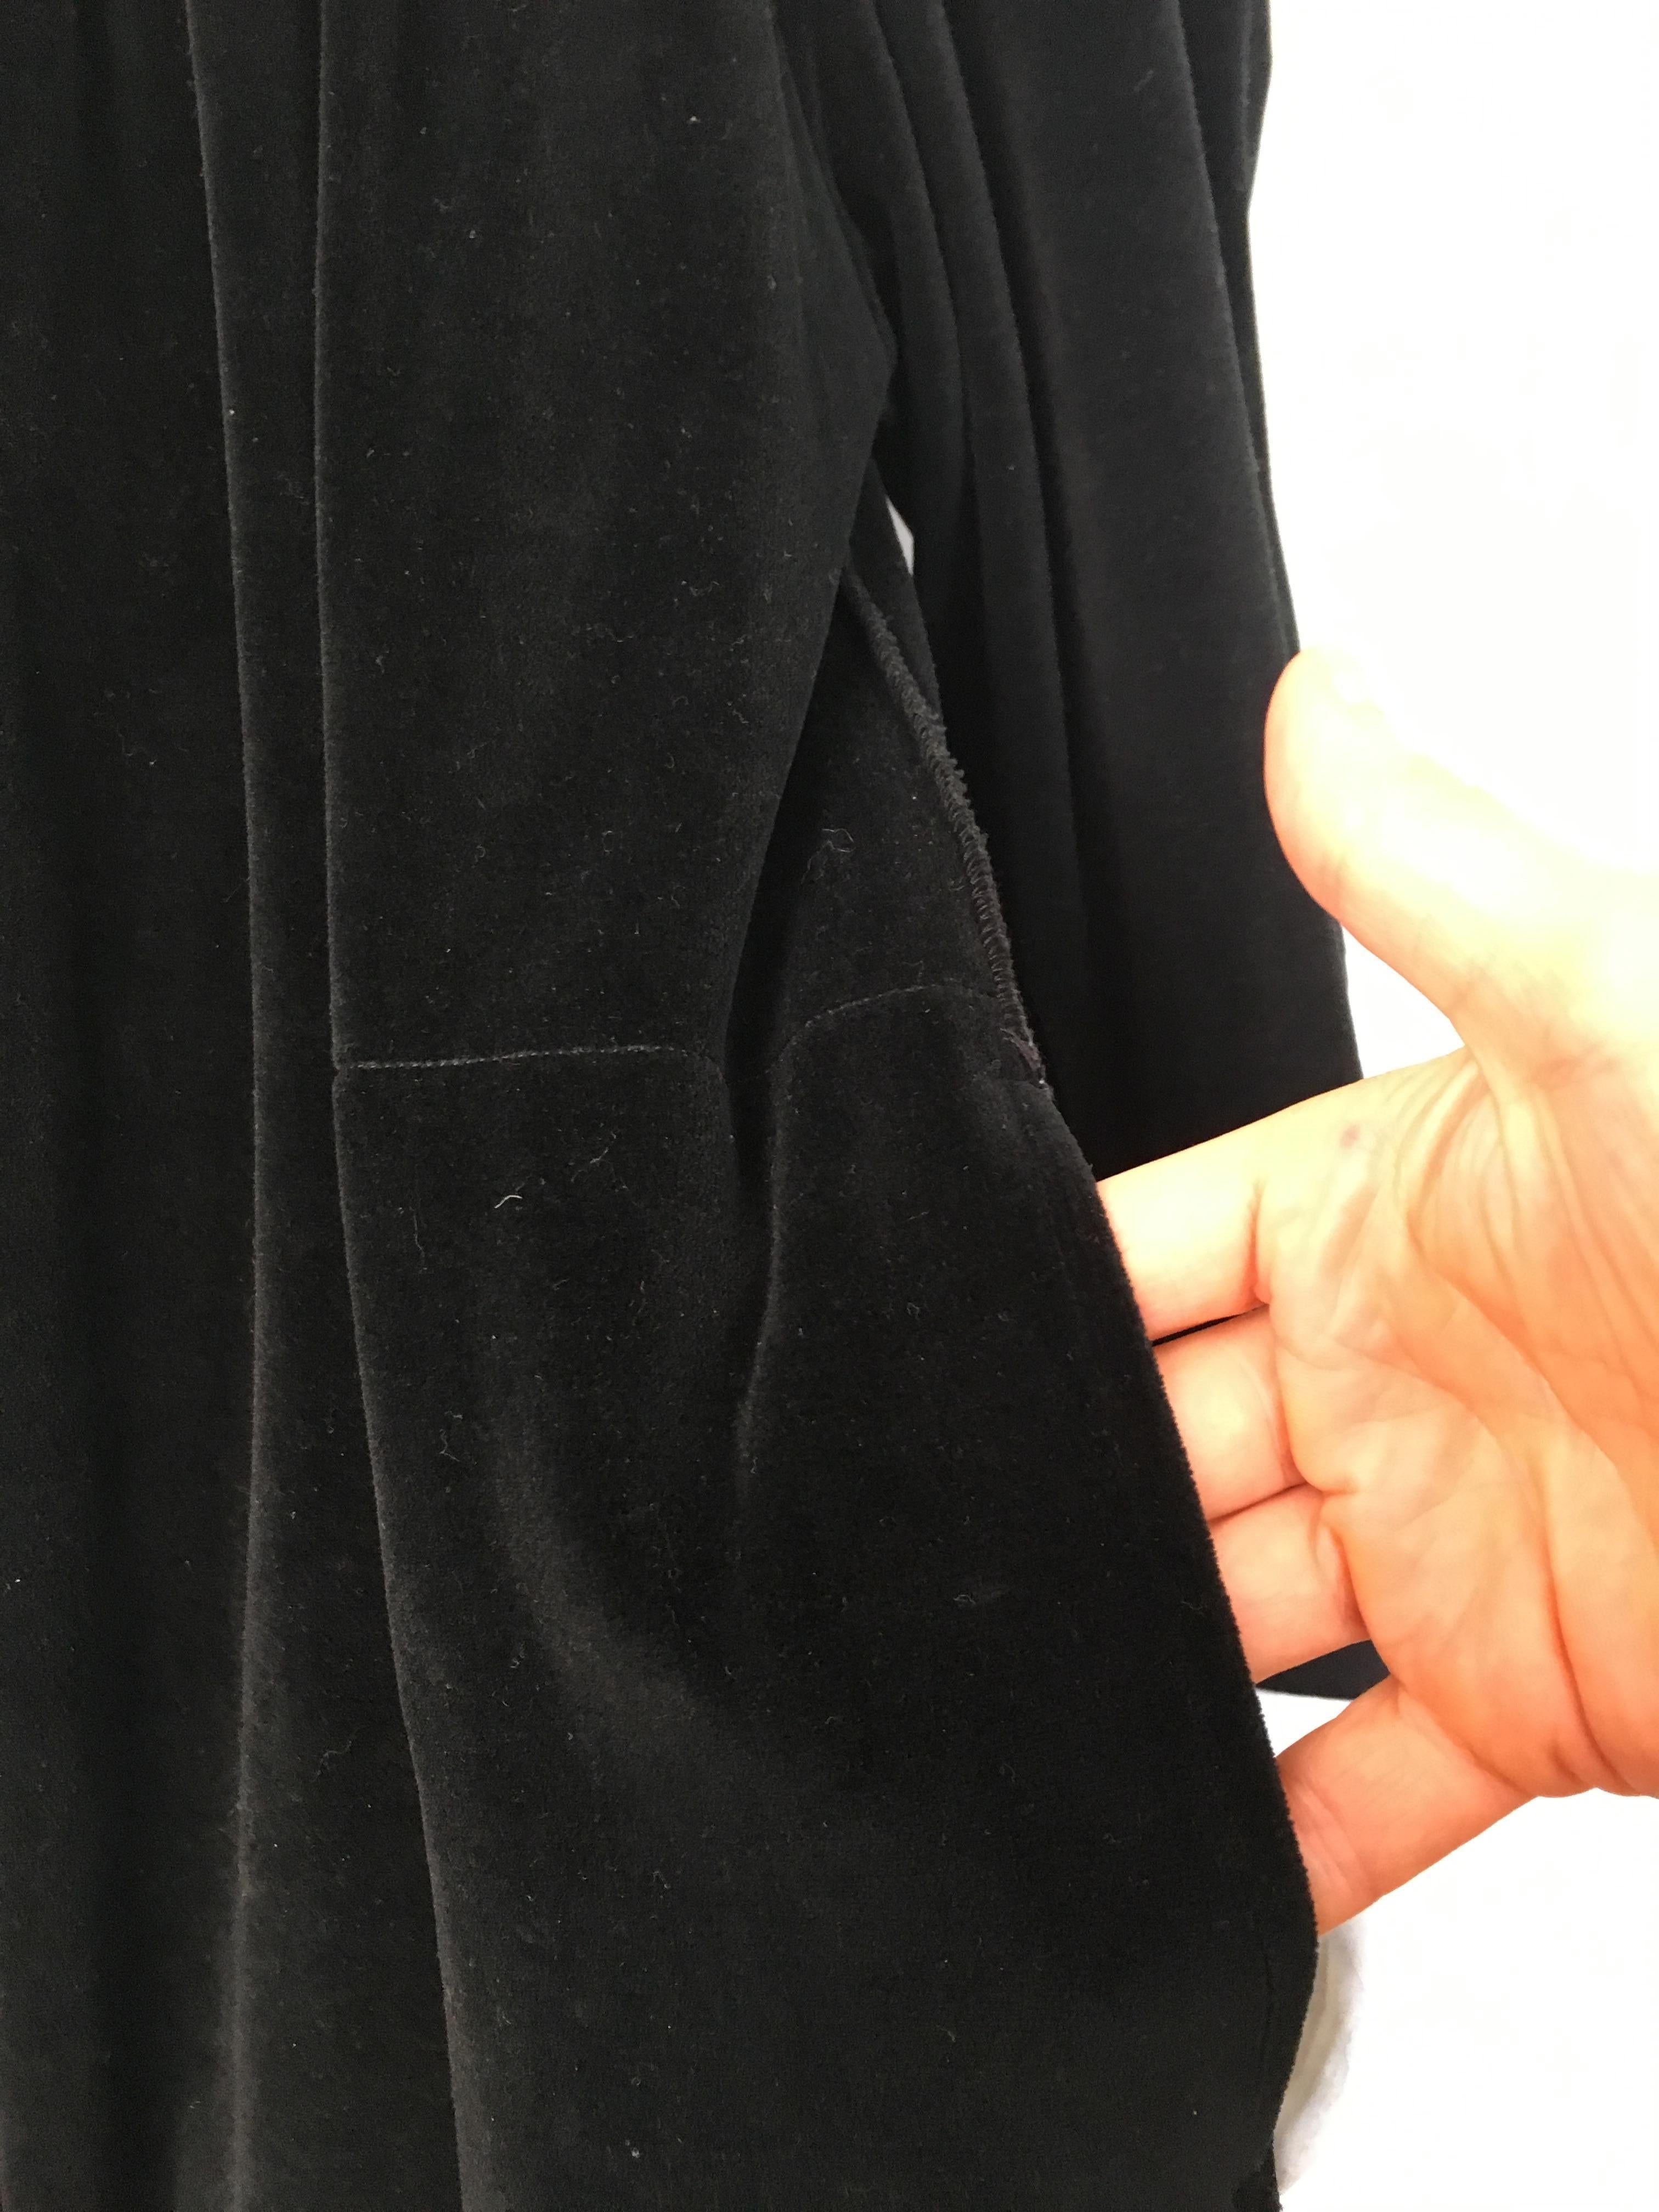 Women's or Men's Sonia Rykiel 1980s Black Velour Dress with Pockets & Cardigan Size Large. For Sale